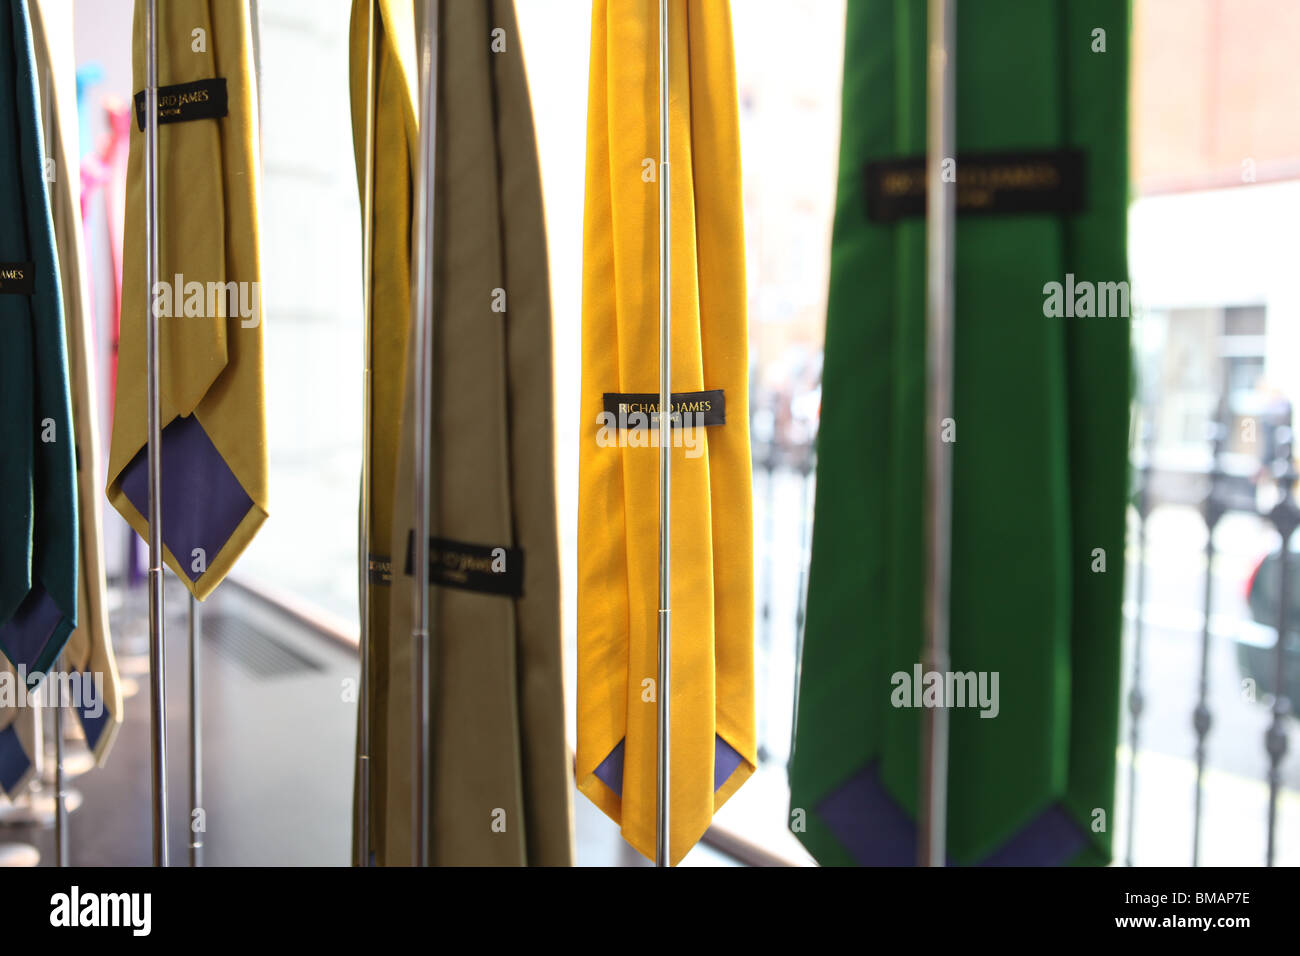 Ties in the window of The Richard James store in Savile Row London. Stock Photo